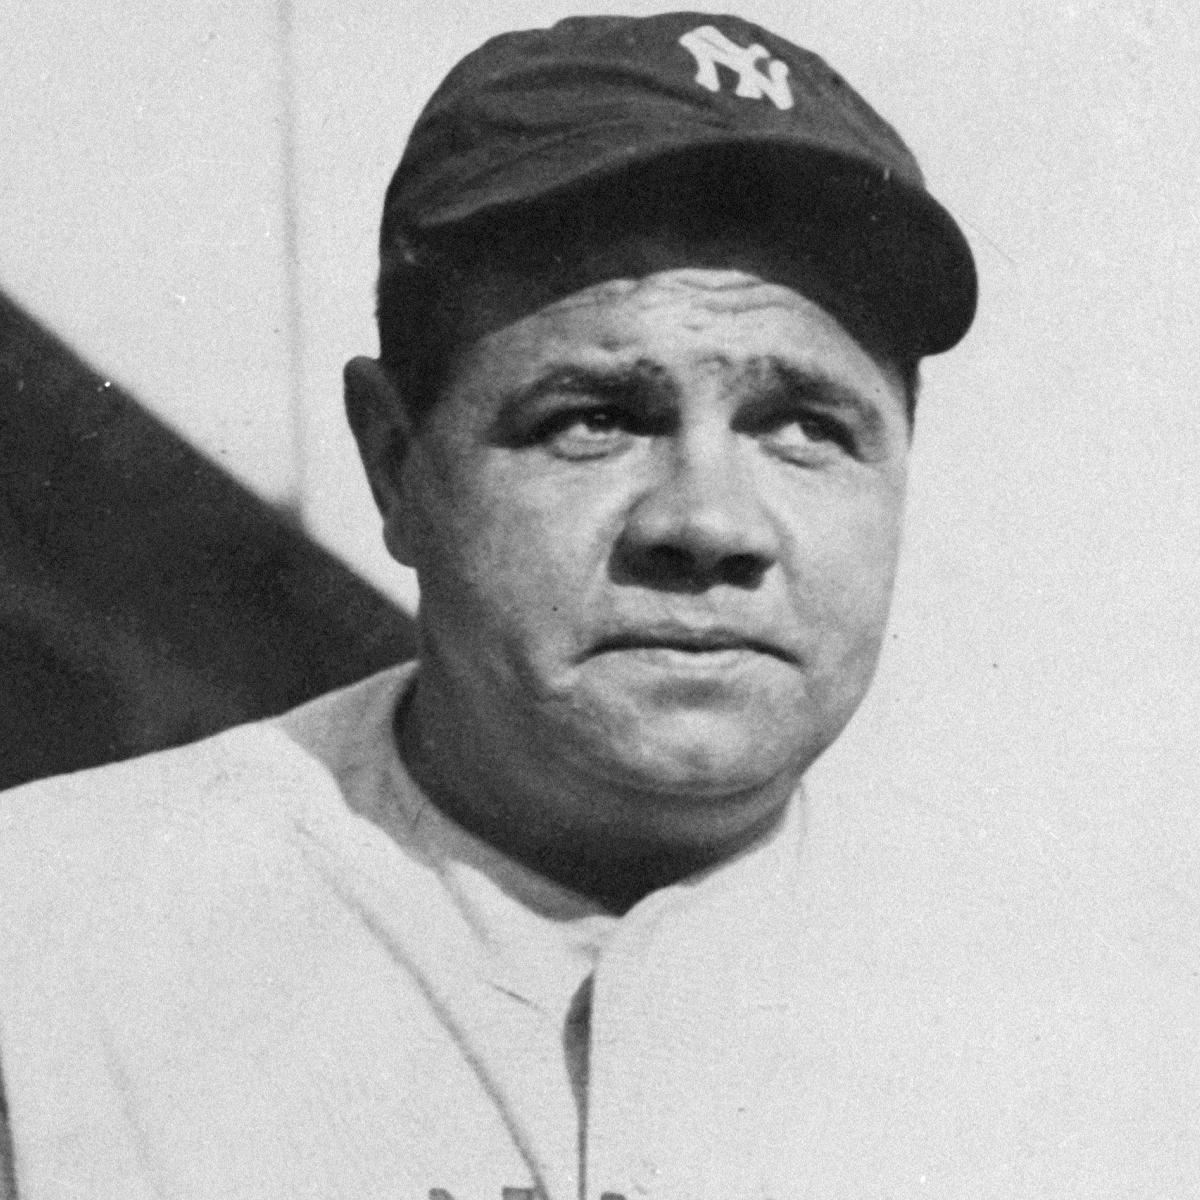 Babe Ruth 1933 Goudey Card Sells for $76,000 at Auction